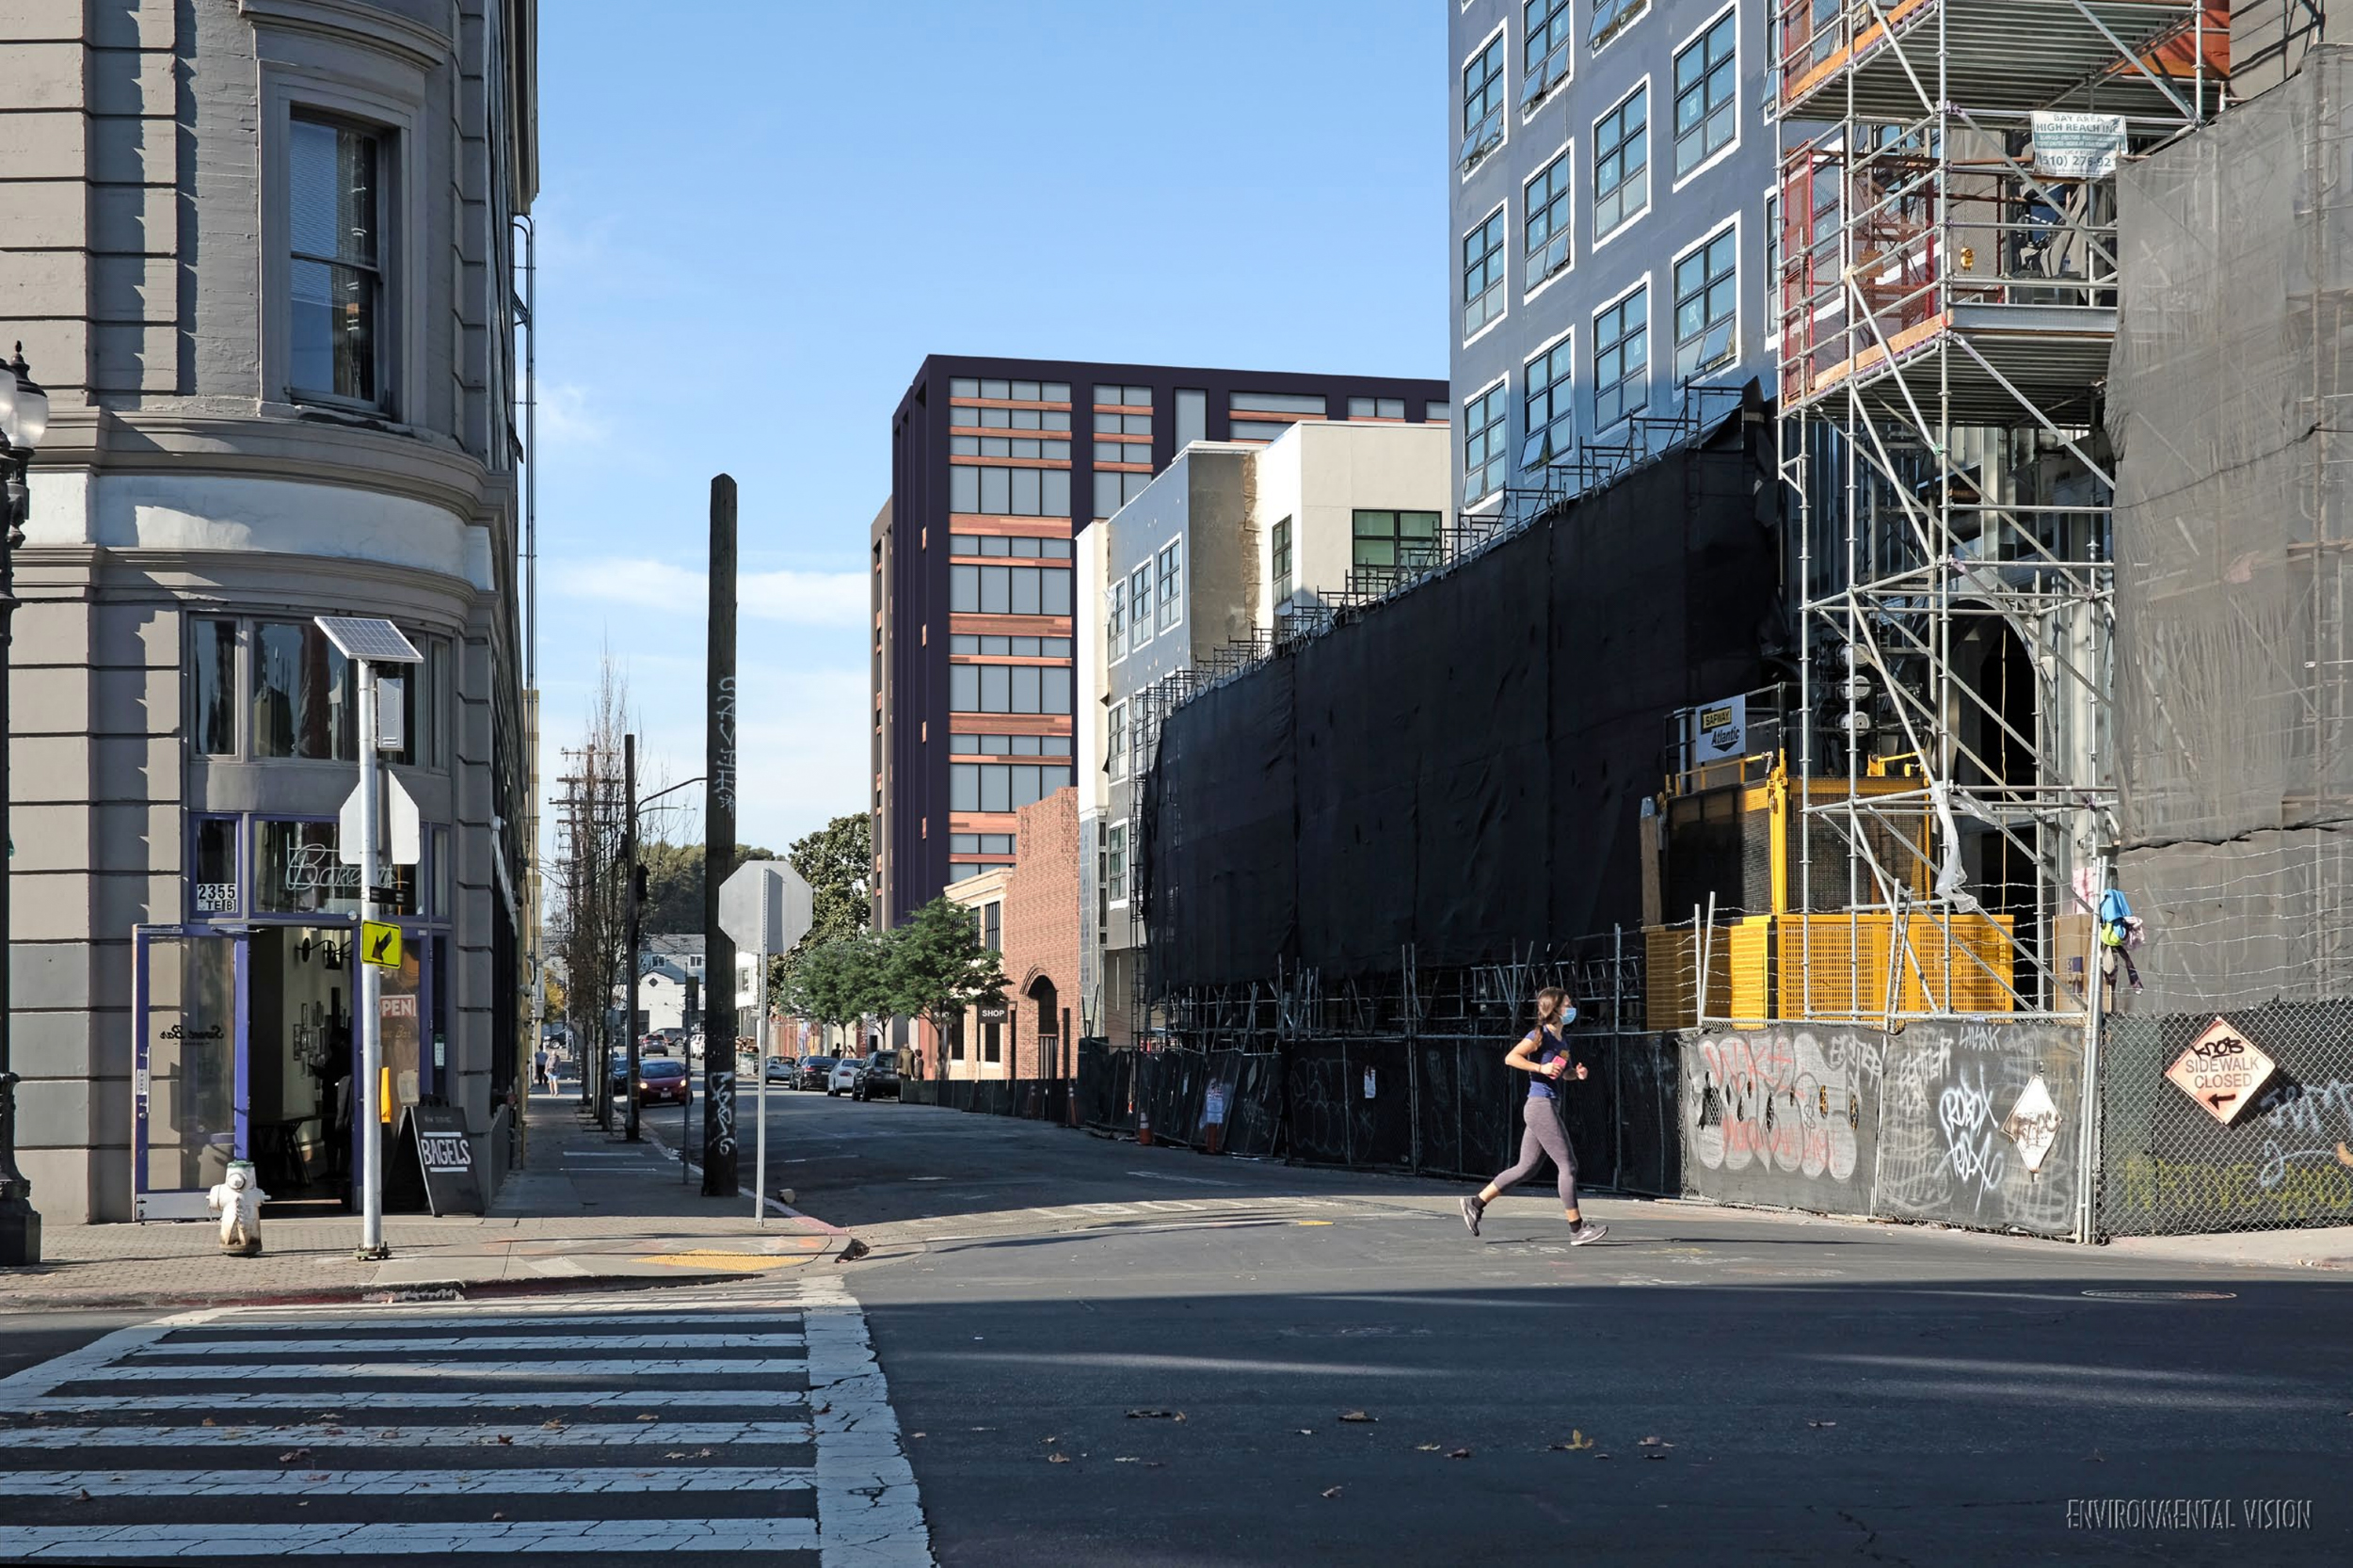 460 24th Street seen from Broadway and 24th Street, rendering by Environmental Vision